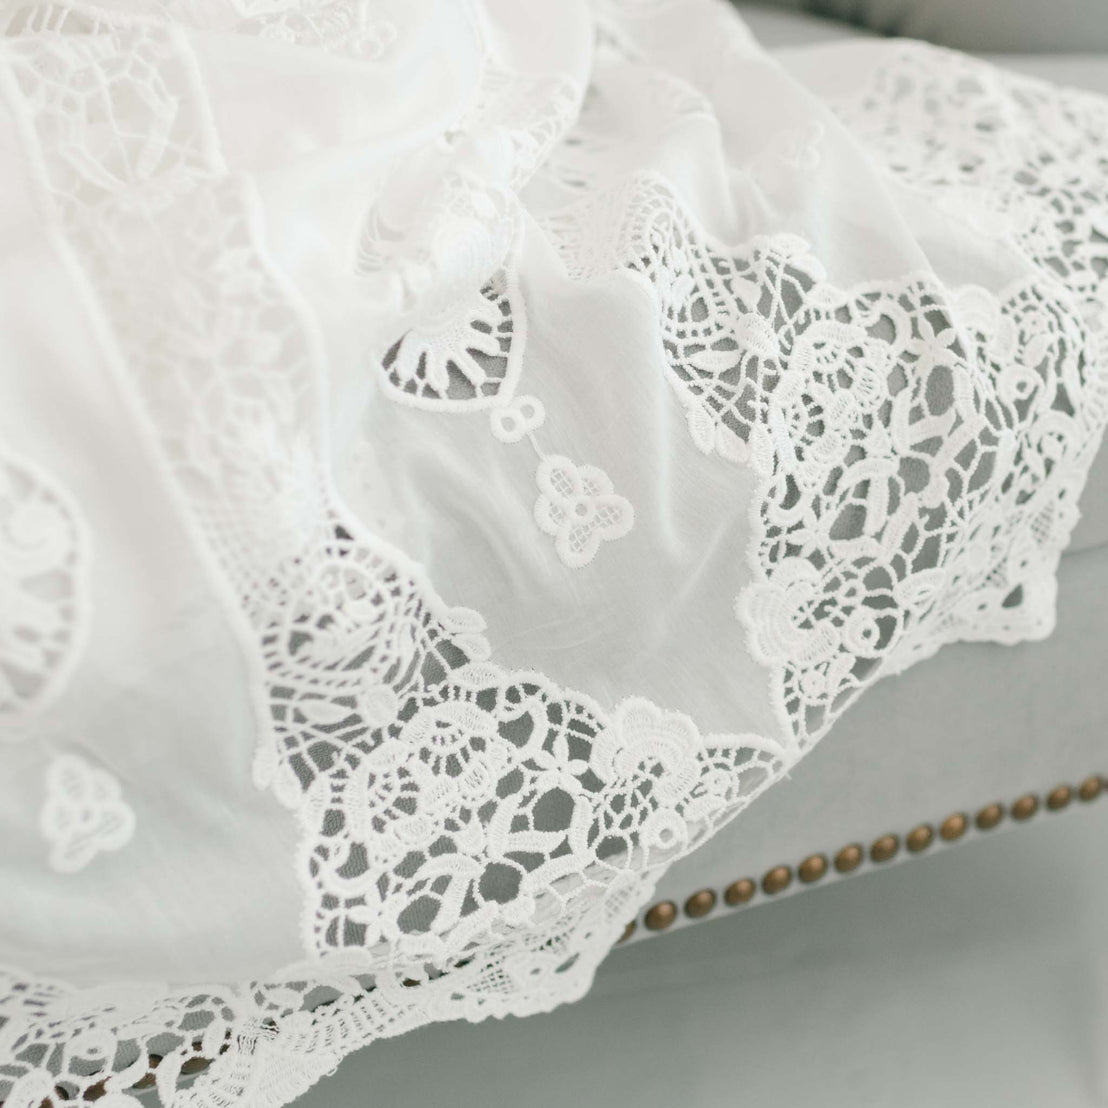 Close-up image of a white lace Grace Dress with intricate floral and heart designs, draped over an edge with a matte gray background.